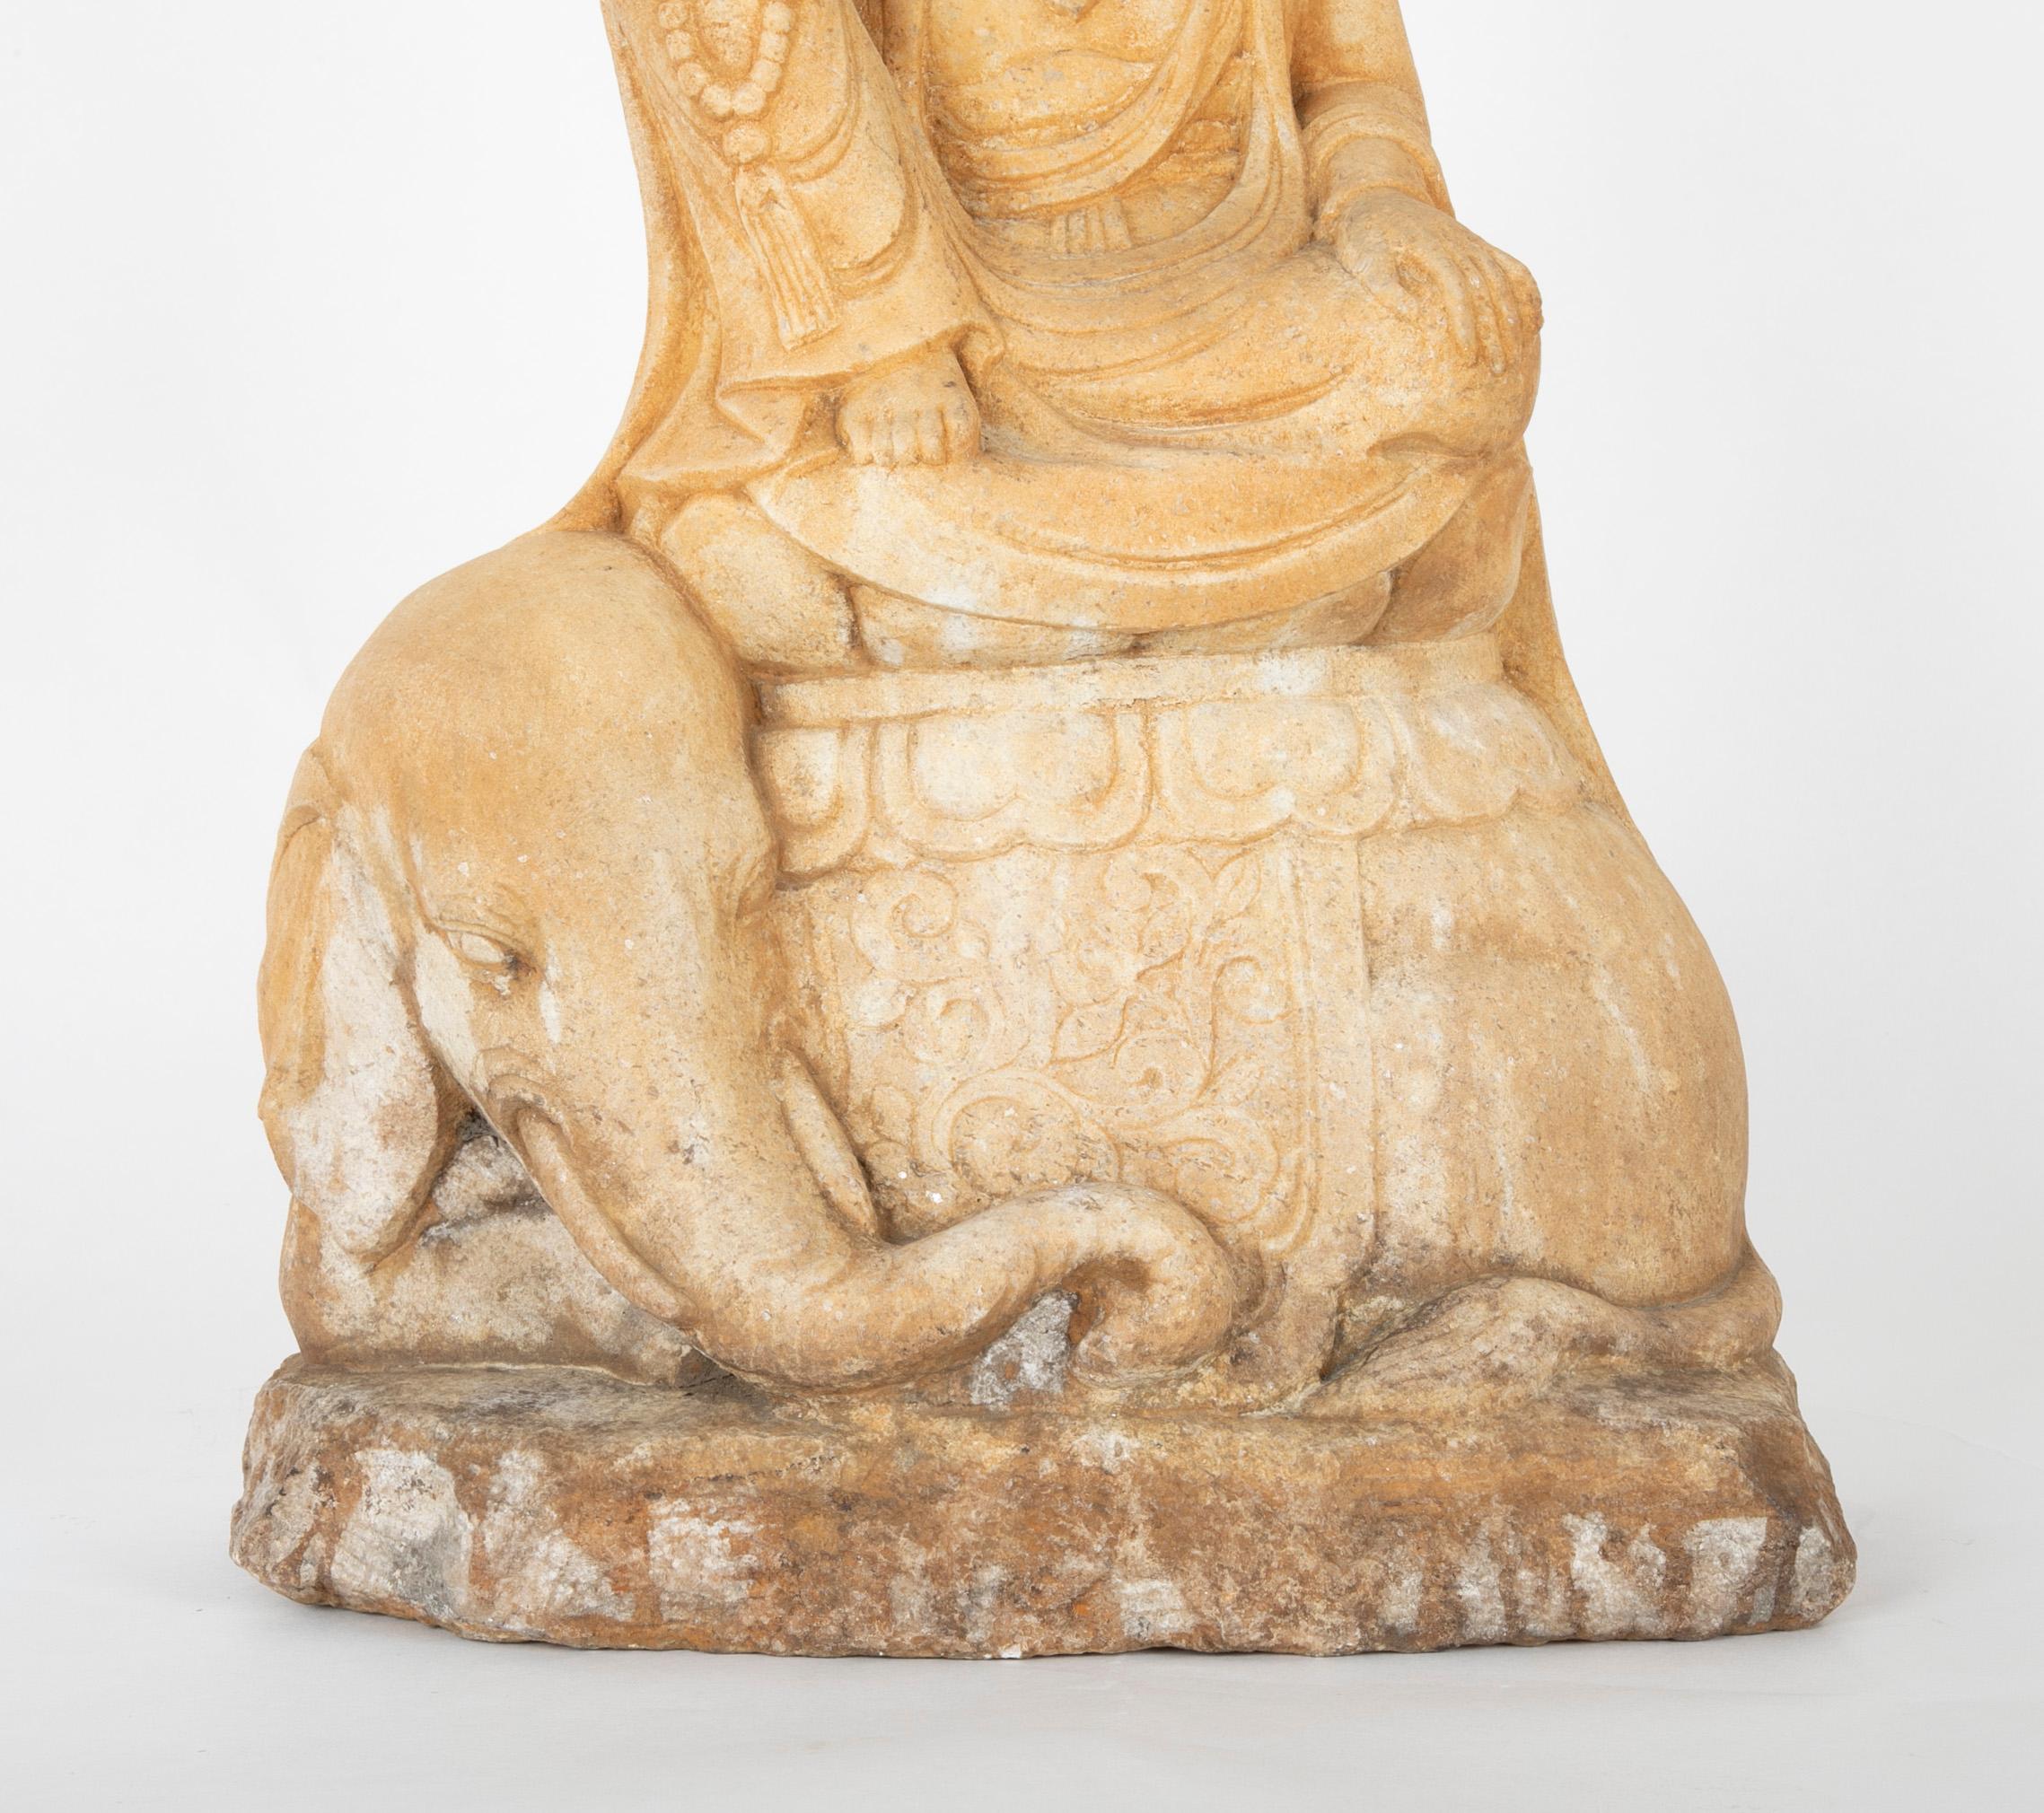 Japanese Carved Stone Kannon on Elephant For Sale